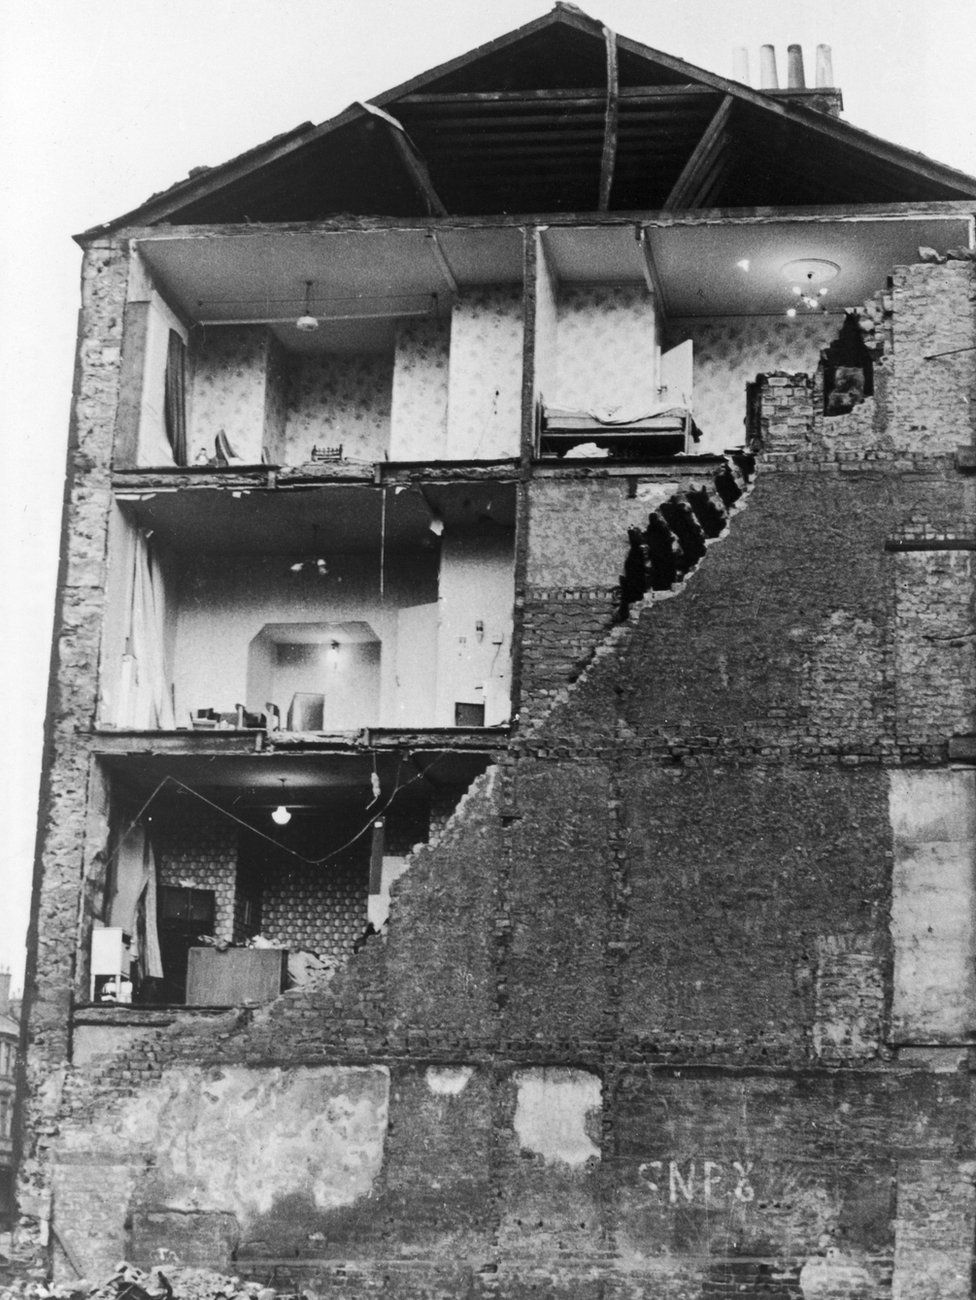 The high winds that hit Southern and Central Scotland in the early hours of the 15th January 1968 ripped away the wall of this Glasgow house. The storm brought havoc to the City leaving 700 people homeless and 9 people dead. 16th January 1968 --- SINGLE USE - AGREED with PHIL COOMES and PAID FOR